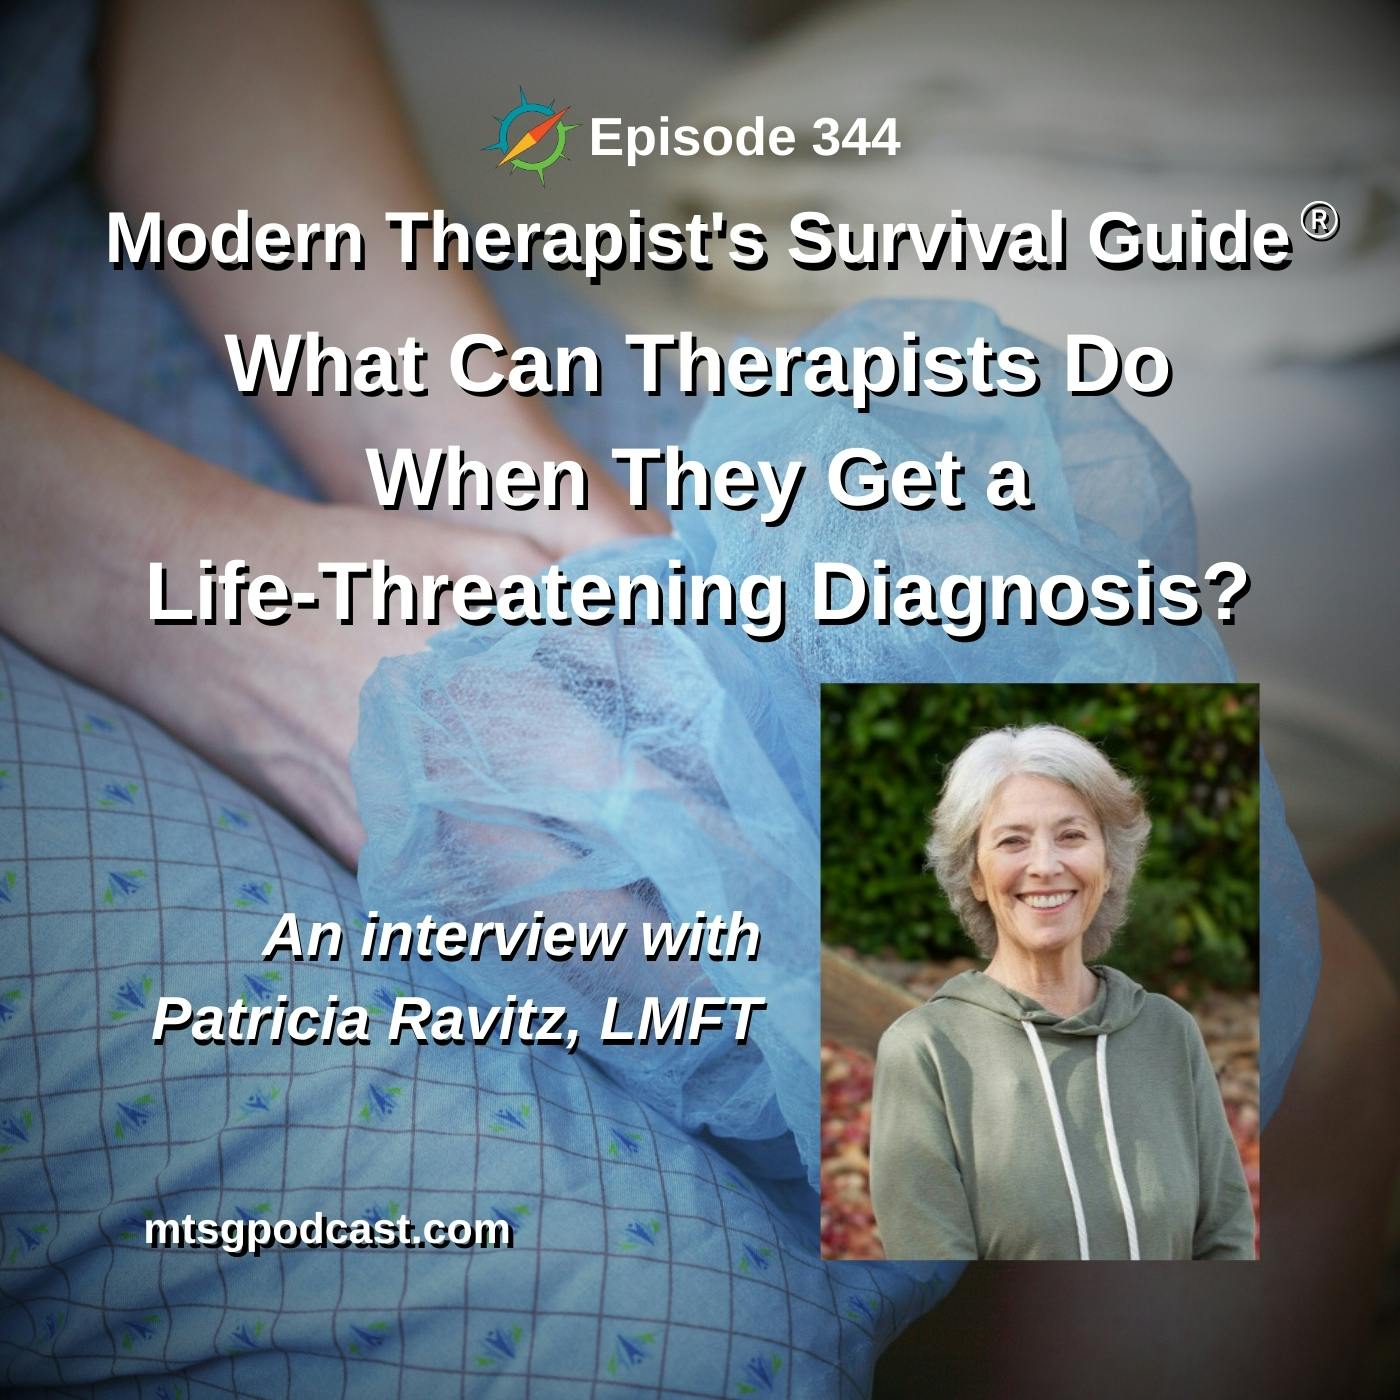 What Can Therapists Do When They Get a Life-Threatening Diagnosis? An interview with Patricia Ravitz, LMFT